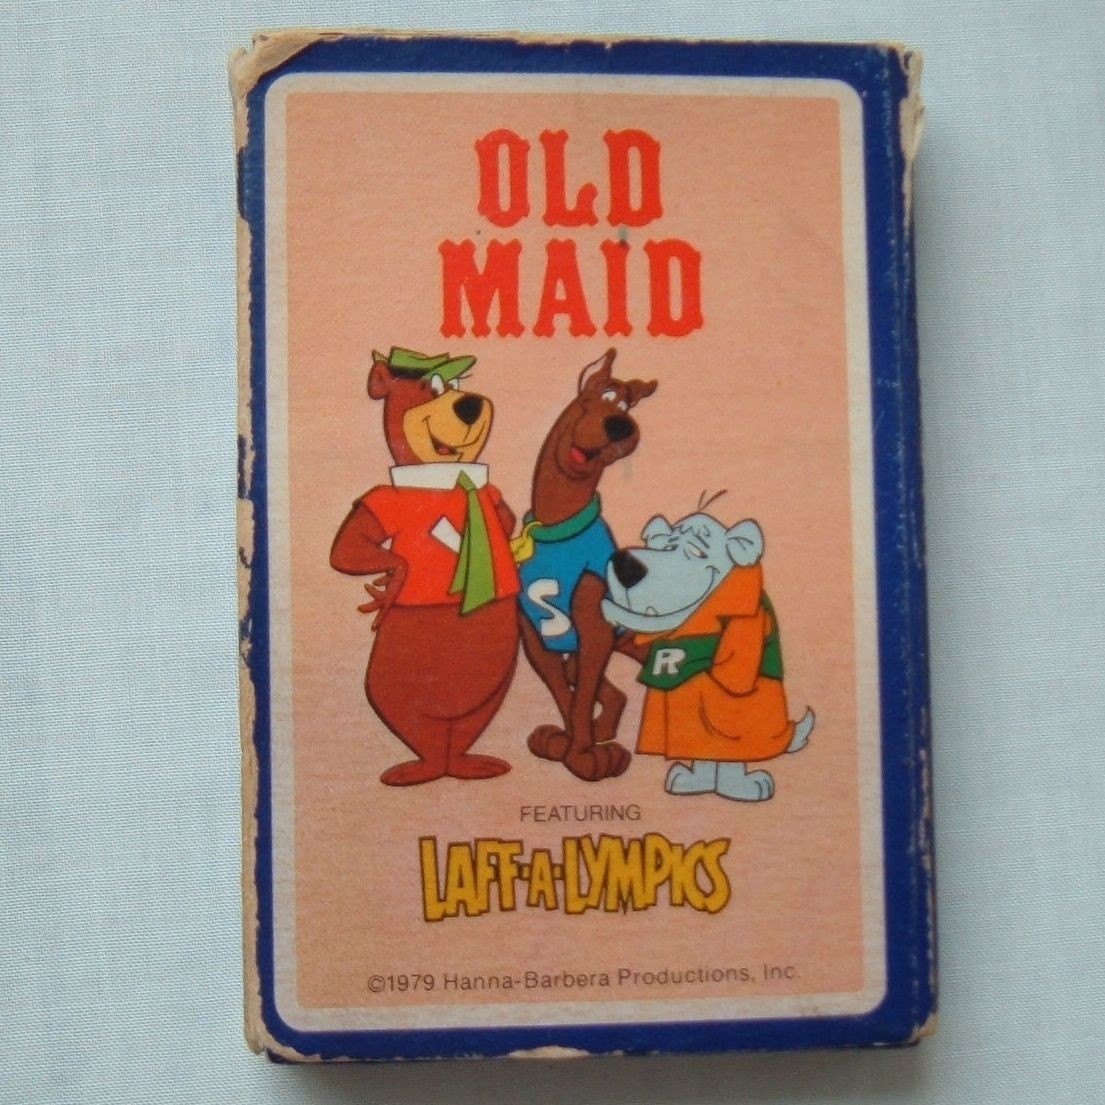 maxiaids old maid card game